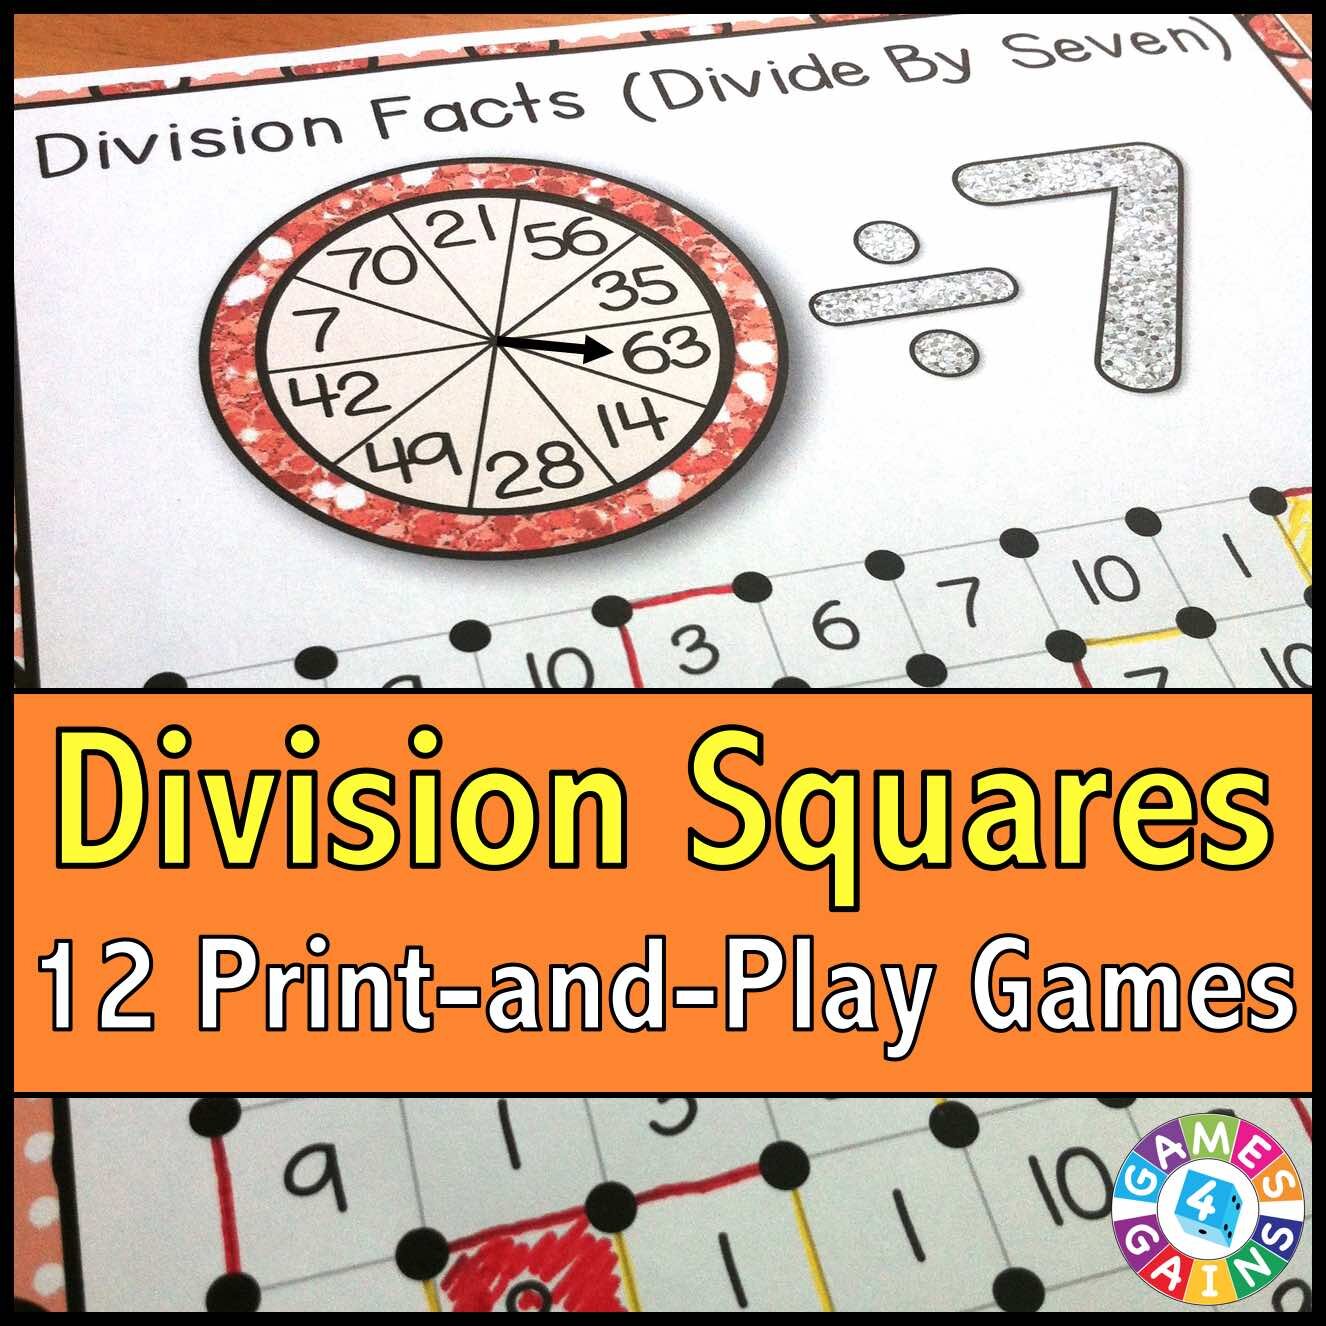 Division Game Cover.jpg